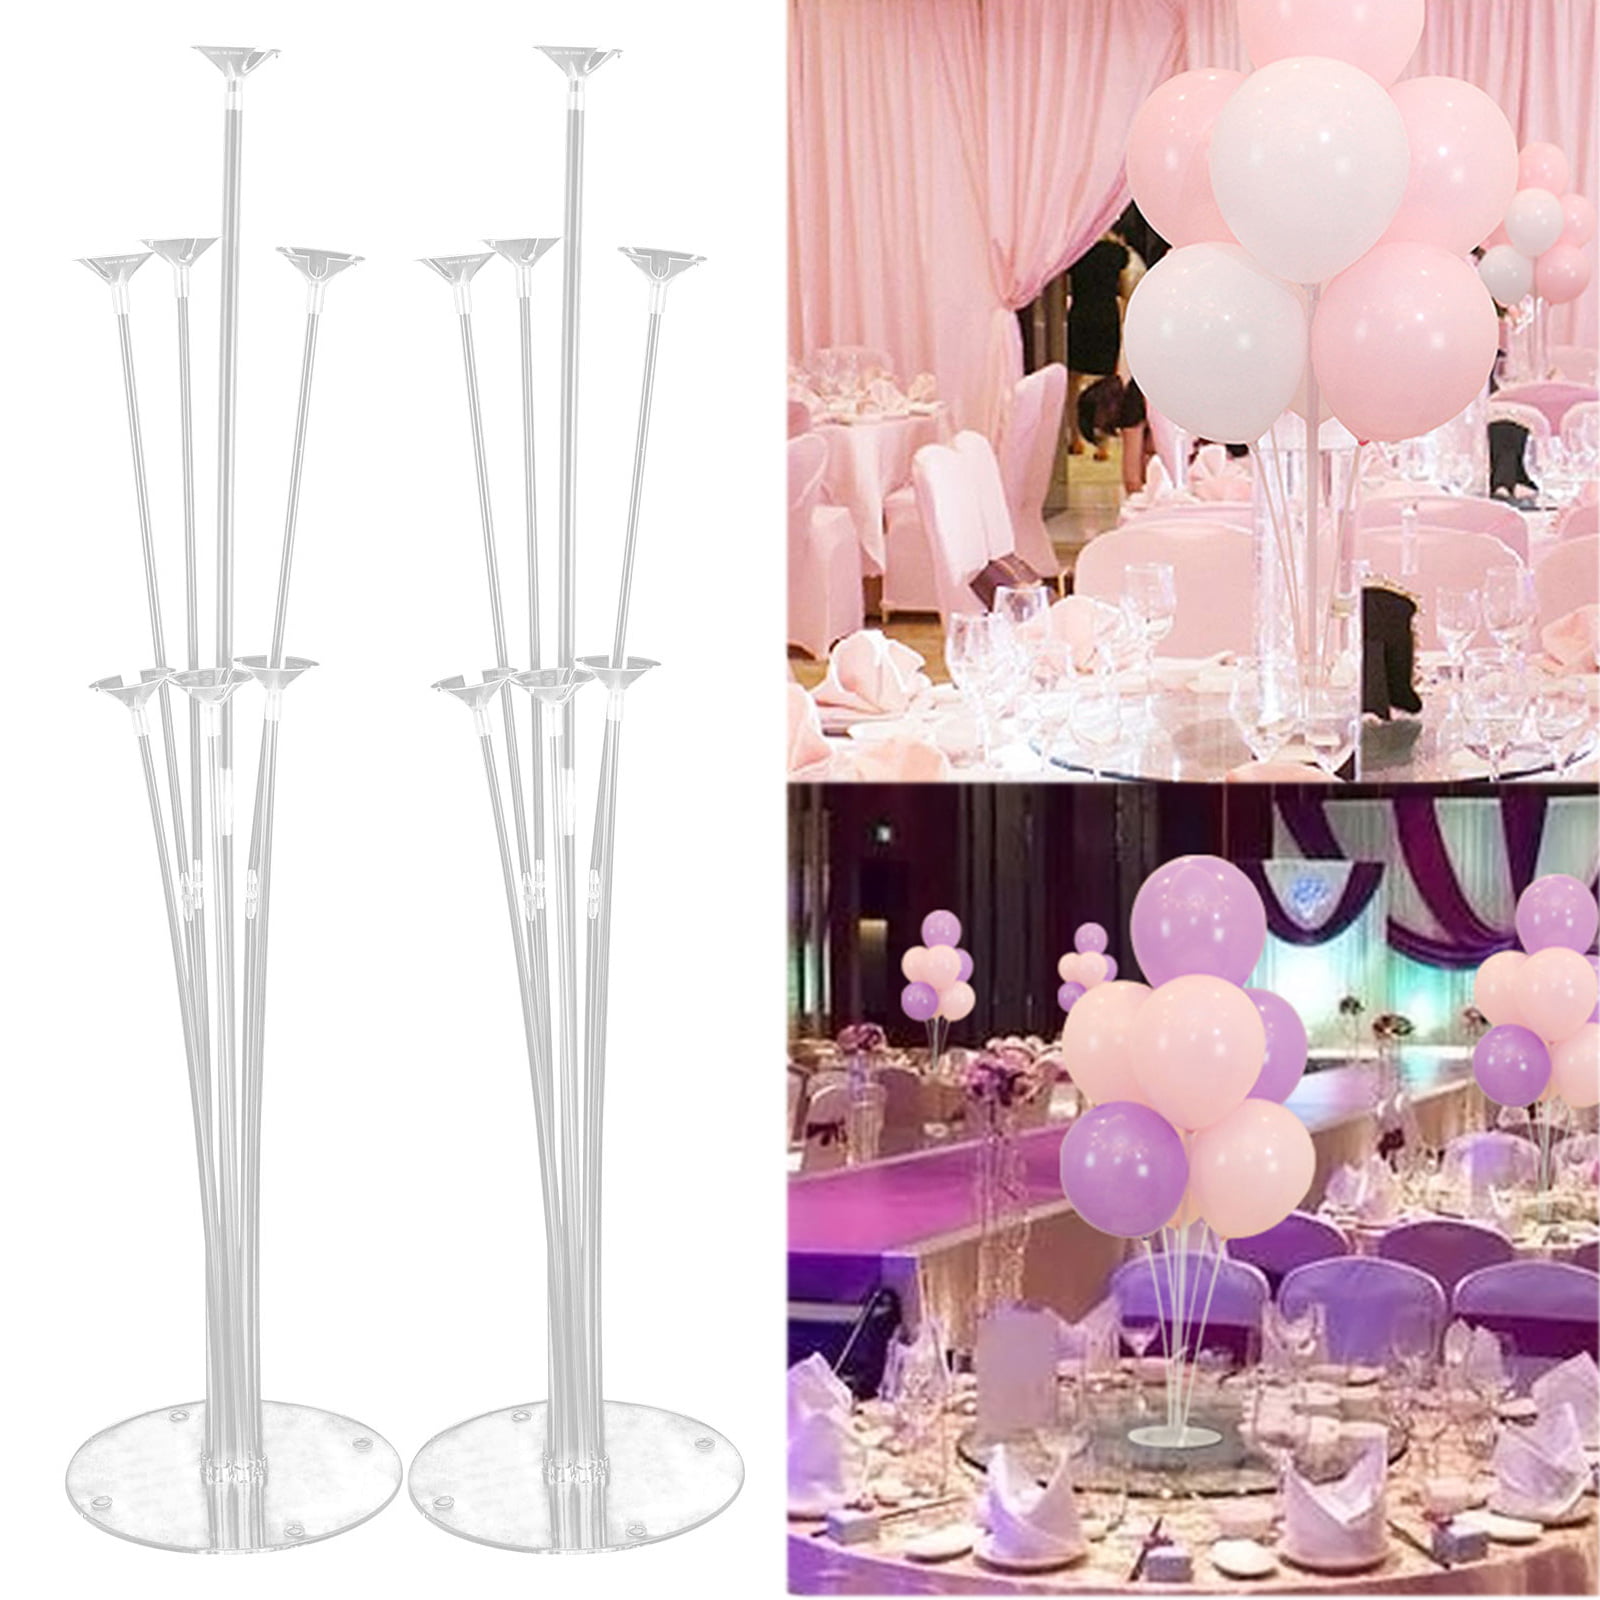 with Balloon Pump Garden Party and Celebration 70cm Table Desktop Balloon Holder Fastener for Wedding Funny House 5 PCS Balloon Stand Display Set Birthday